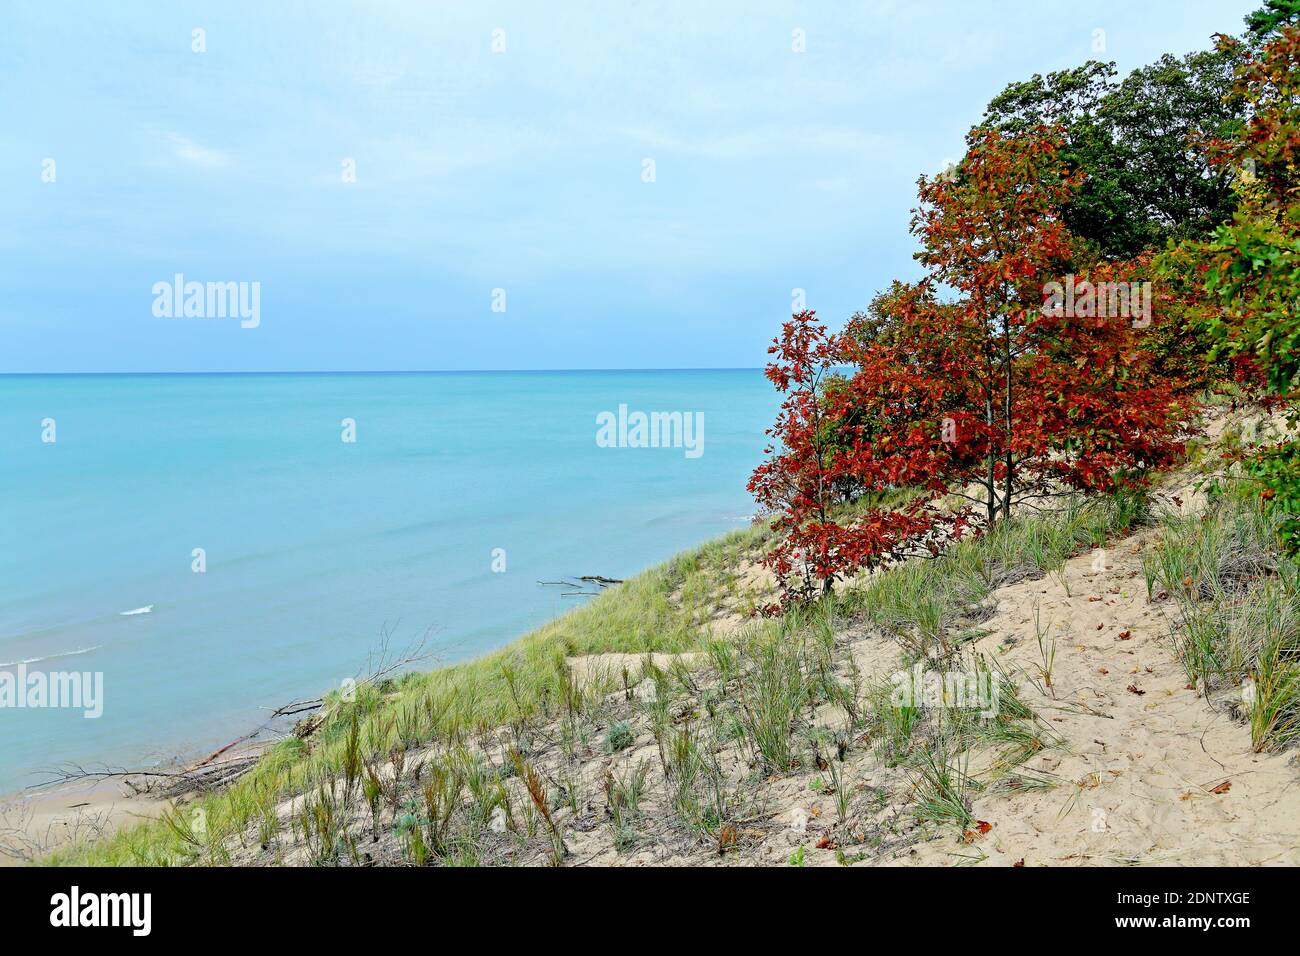 Small oak trees in autumn colors along a sandy dune at Lake Michigan Stock Photo